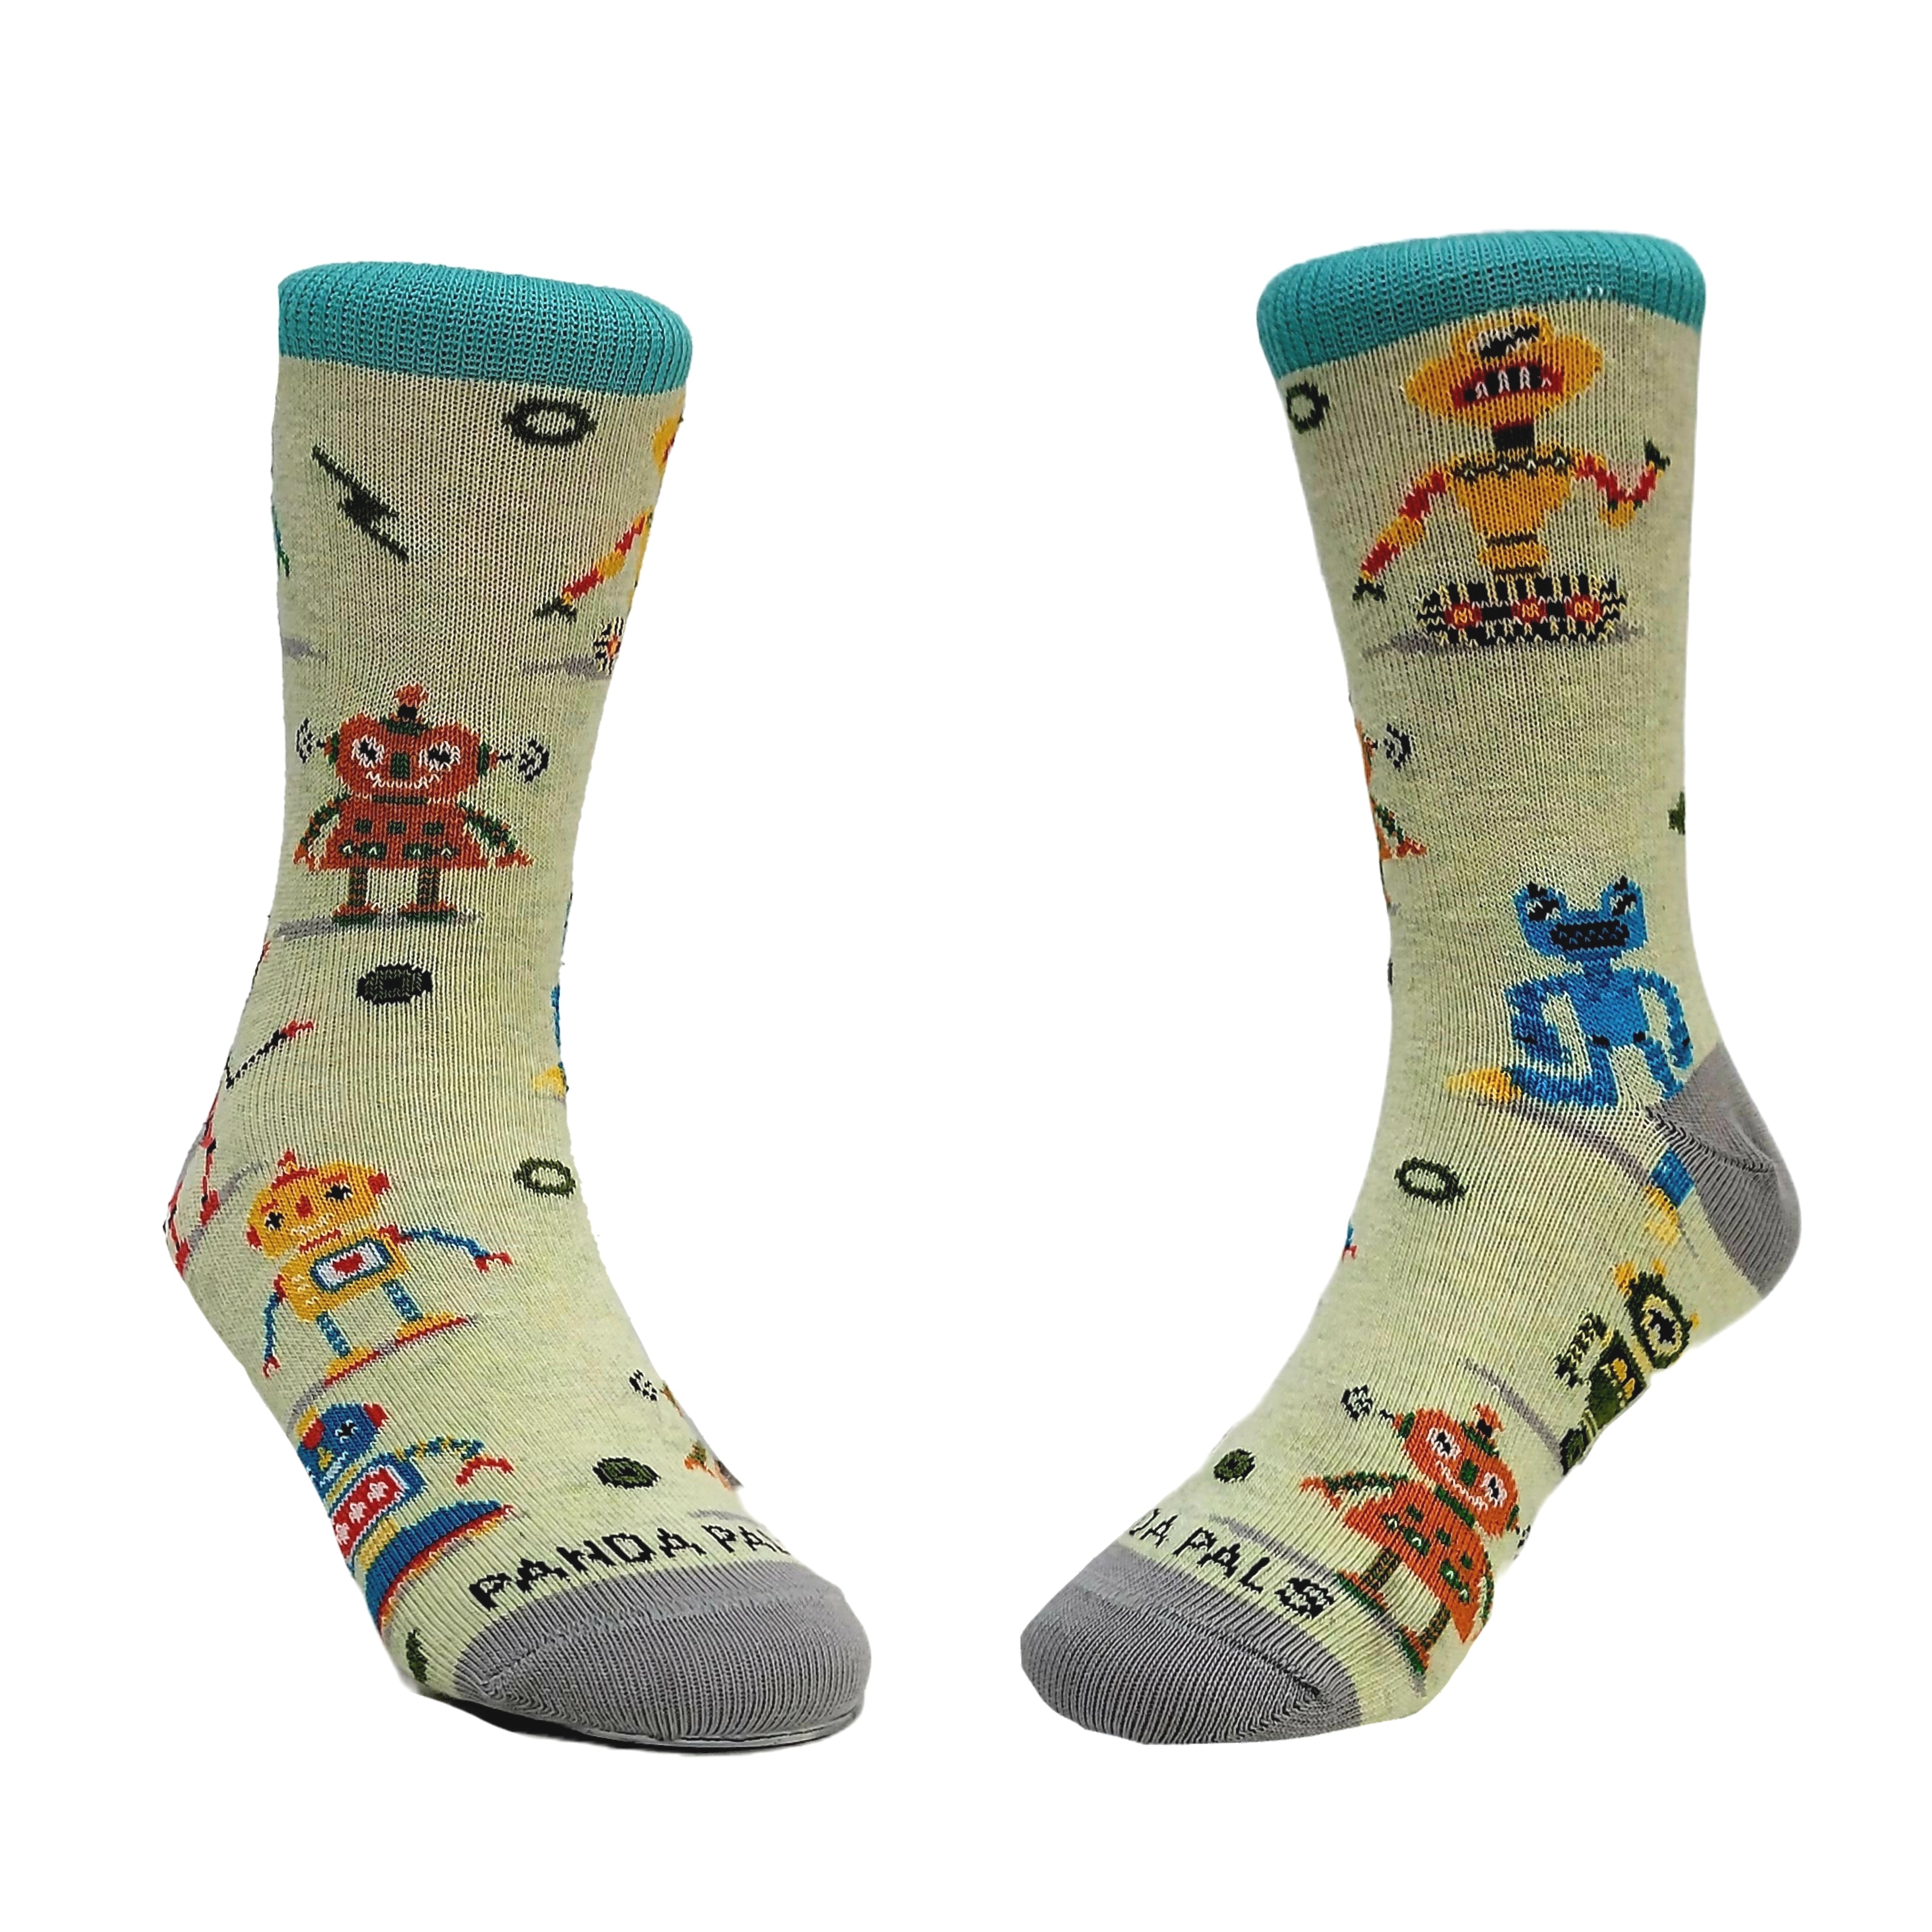 Robot Pattern Socks from the Sock Panda (Ages 3-5)